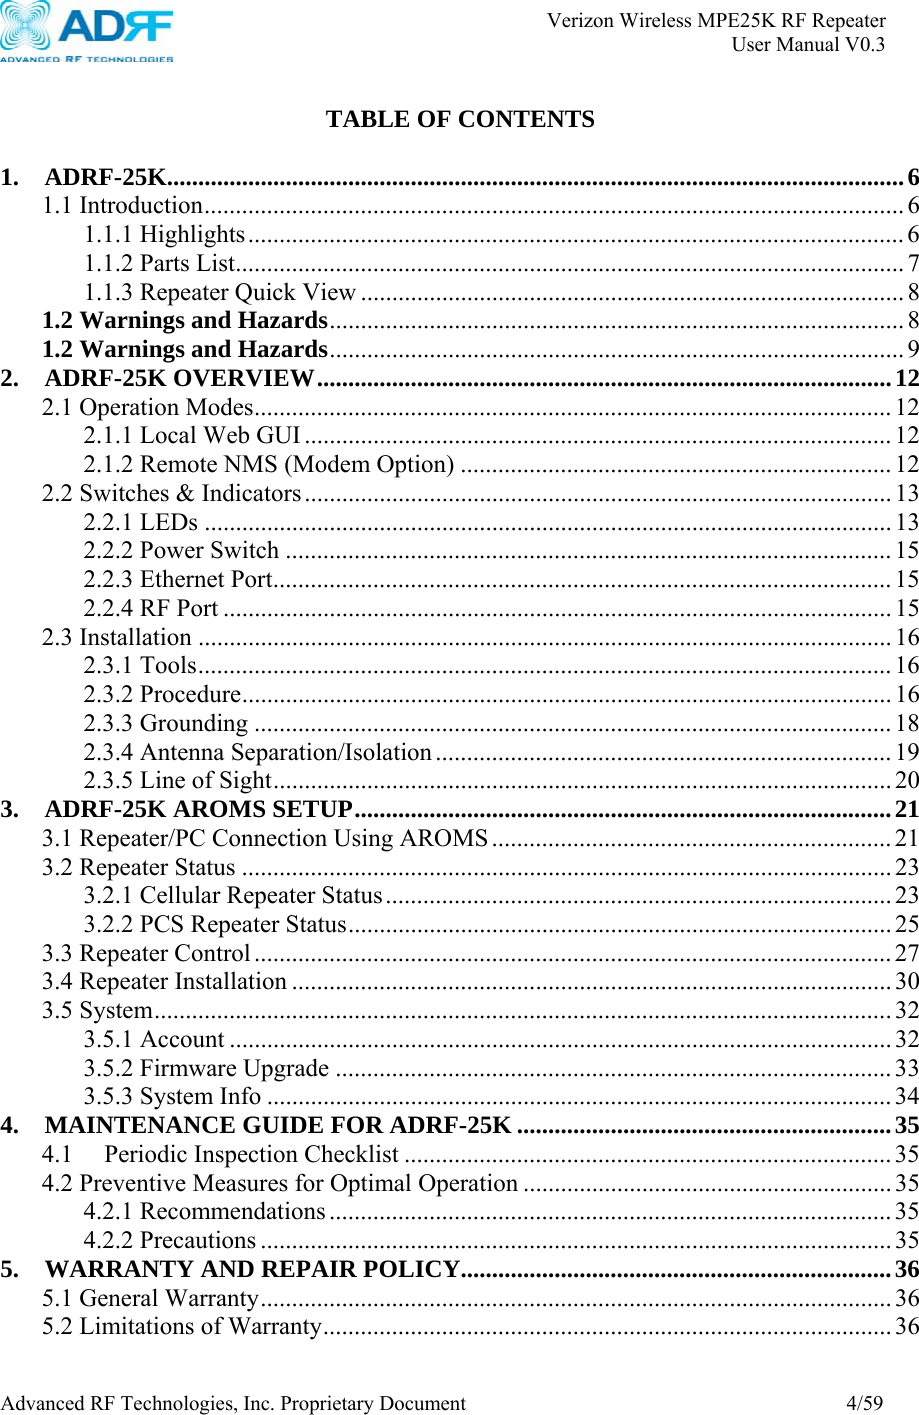       Verizon Wireless MPE25K RF Repeater   User Manual V0.3 Advanced RF Technologies, Inc. Proprietary Document  4/59  TABLE OF CONTENTS  1. ADRF-25K......................................................................................................................6 1.1 Introduction................................................................................................................6 1.1.1 Highlights......................................................................................................... 6 1.1.2 Parts List........................................................................................................... 7 1.1.3 Repeater Quick View ....................................................................................... 8 1.2 Warnings and Hazards............................................................................................ 8 1.2 Warnings and Hazards............................................................................................ 9 2. ADRF-25K OVERVIEW............................................................................................12 2.1 Operation Modes...................................................................................................... 12 2.1.1 Local Web GUI .............................................................................................. 12 2.1.2 Remote NMS (Modem Option) .....................................................................12 2.2 Switches &amp; Indicators.............................................................................................. 13 2.2.1 LEDs .............................................................................................................. 13 2.2.2 Power Switch ................................................................................................. 15 2.2.3 Ethernet Port................................................................................................... 15 2.2.4 RF Port ........................................................................................................... 15 2.3 Installation ............................................................................................................... 16 2.3.1 Tools............................................................................................................... 16 2.3.2 Procedure........................................................................................................ 16 2.3.3 Grounding ...................................................................................................... 18 2.3.4 Antenna Separation/Isolation ......................................................................... 19 2.3.5 Line of Sight................................................................................................... 20 3. ADRF-25K AROMS SETUP......................................................................................21 3.1 Repeater/PC Connection Using AROMS ................................................................ 21 3.2 Repeater Status ........................................................................................................ 23 3.2.1 Cellular Repeater Status................................................................................. 23 3.2.2 PCS Repeater Status....................................................................................... 25 3.3 Repeater Control ...................................................................................................... 27 3.4 Repeater Installation ................................................................................................ 30 3.5 System......................................................................................................................32 3.5.1 Account .......................................................................................................... 32 3.5.2 Firmware Upgrade .........................................................................................33 3.5.3 System Info .................................................................................................... 34 4. MAINTENANCE GUIDE FOR ADRF-25K ............................................................35 4.1 Periodic Inspection Checklist .............................................................................. 35 4.2 Preventive Measures for Optimal Operation ........................................................... 35 4.2.1 Recommendations .......................................................................................... 35 4.2.2 Precautions ..................................................................................................... 35 5. WARRANTY AND REPAIR POLICY.....................................................................36 5.1 General Warranty..................................................................................................... 36 5.2 Limitations of Warranty........................................................................................... 36 